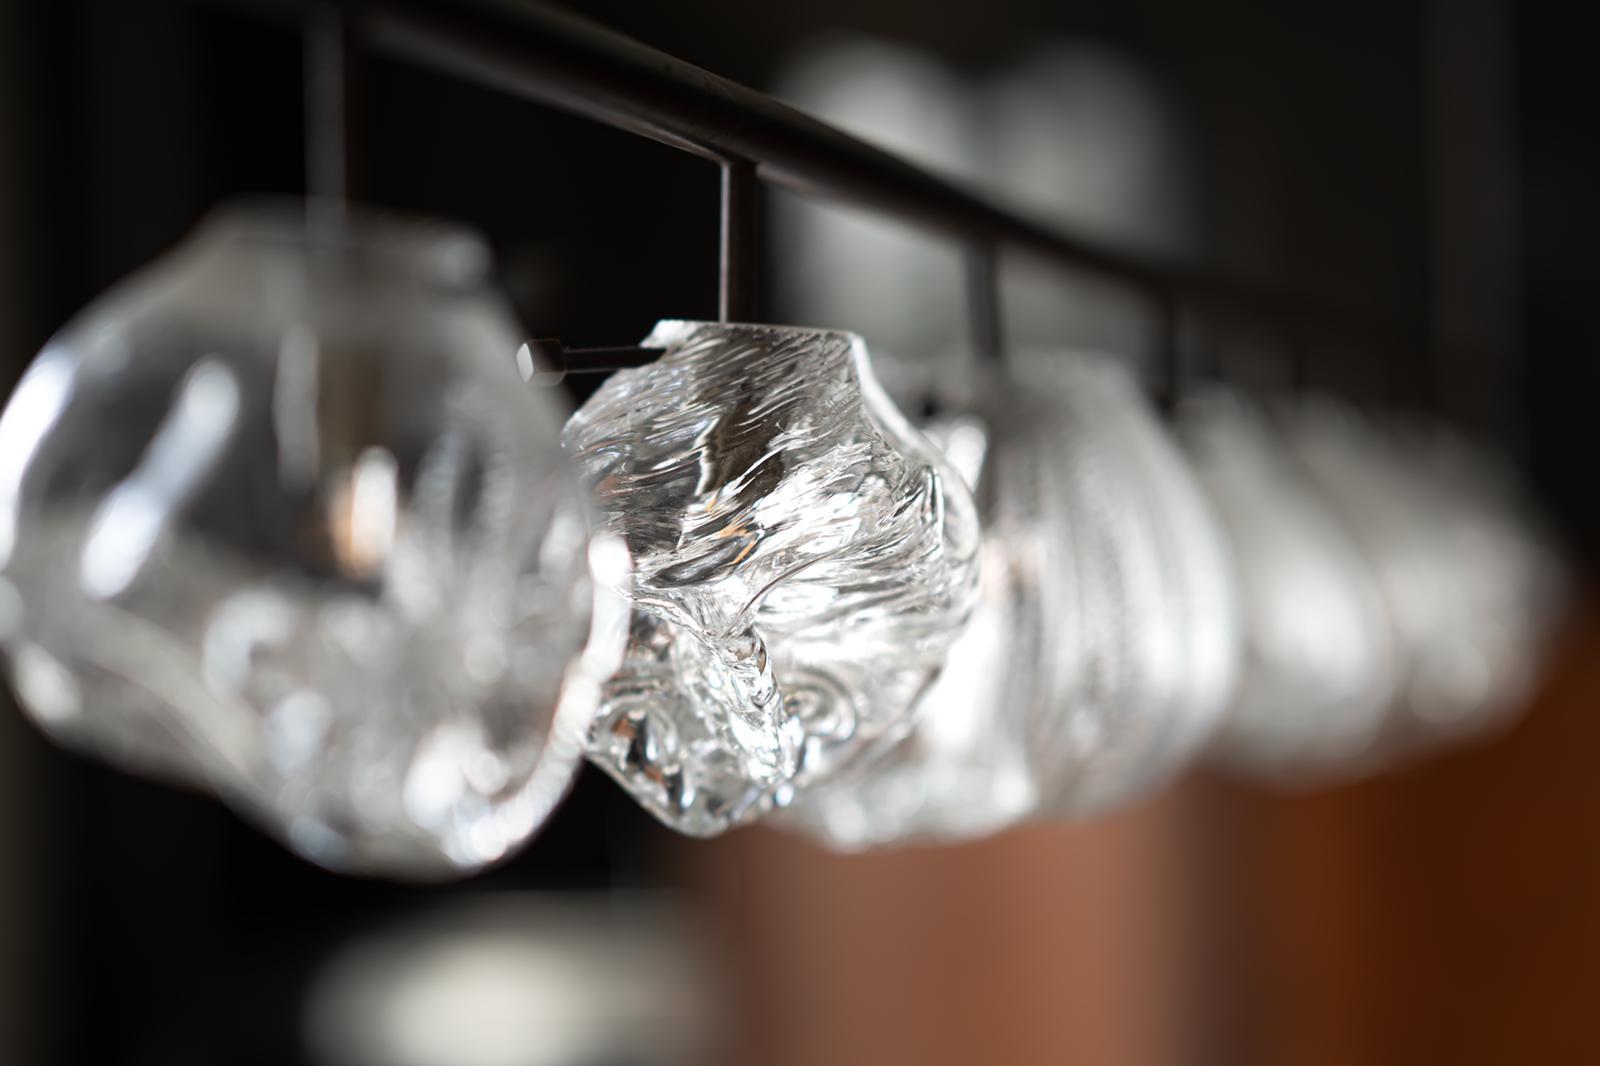 clear pendant lamp by Sema Topaloglu

This product is hand-crafted therefore each production is unique and might not be exactly the same as visual.

Sema Topaloglu Studio is known for the original designs of interiors, sculptures and furniture